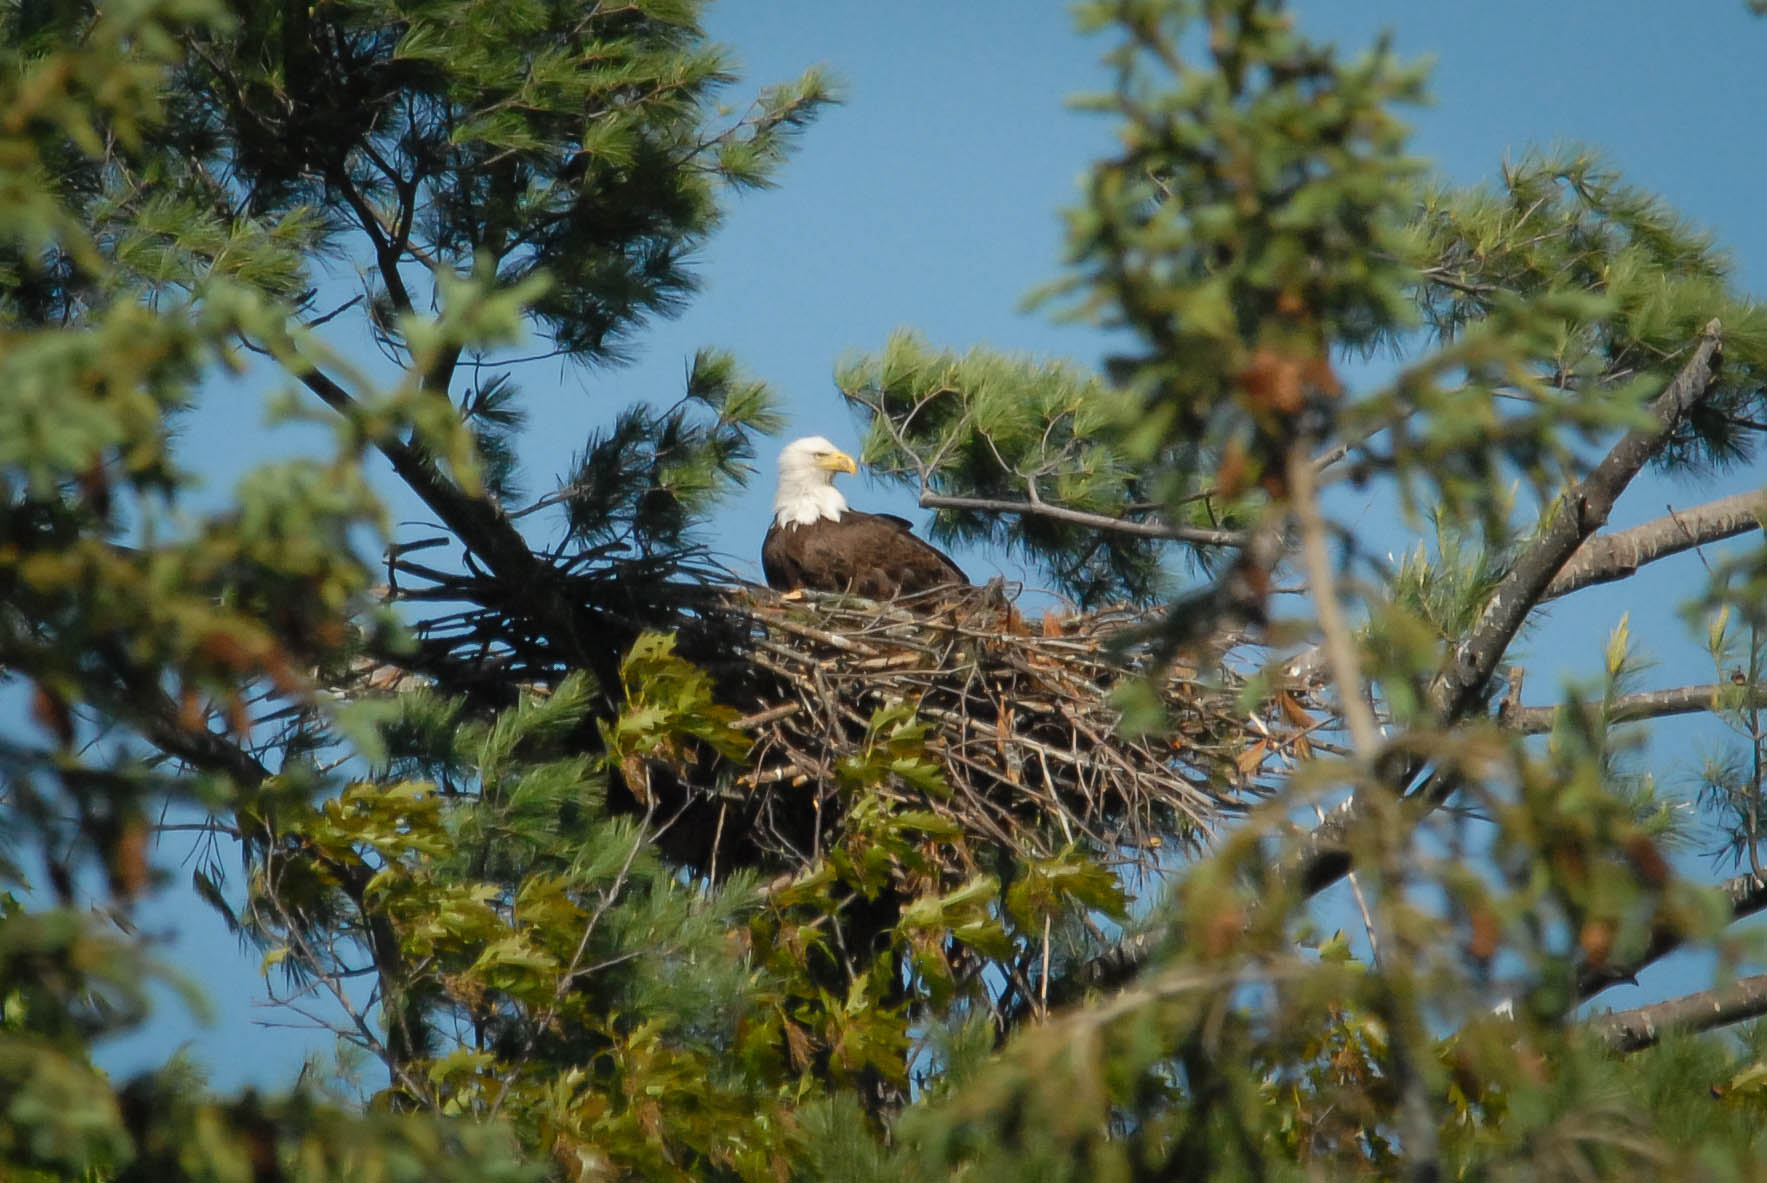 As bald eagle nests become more common in Vermont, the Fish & Wildlife Department is asking bird-watchers to enjoy the birds from a safe distance to avoid disturbing them. Photo by John Hall, Vermont Fish & Wildlife Department.